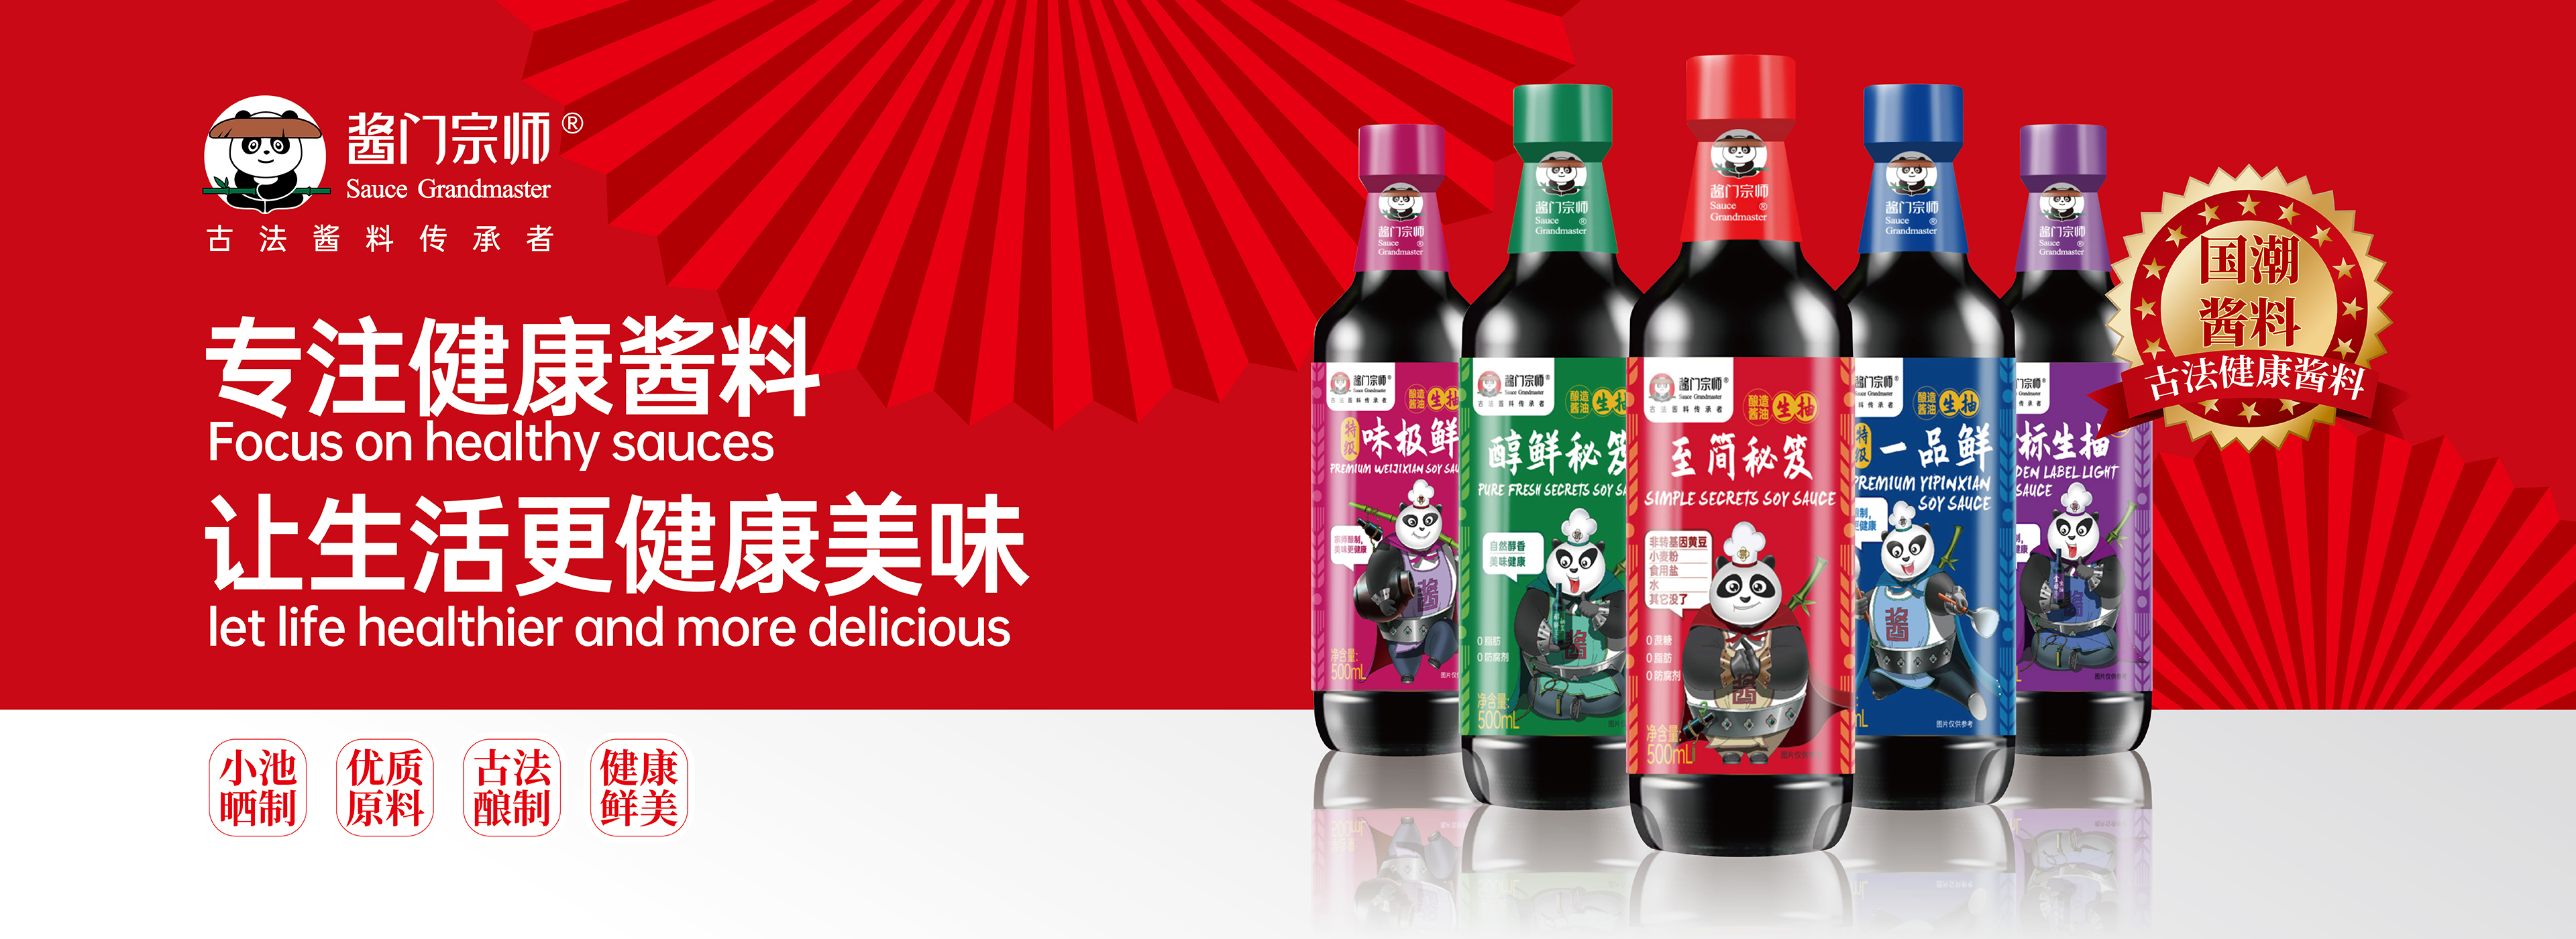 desly soy sauce banner01